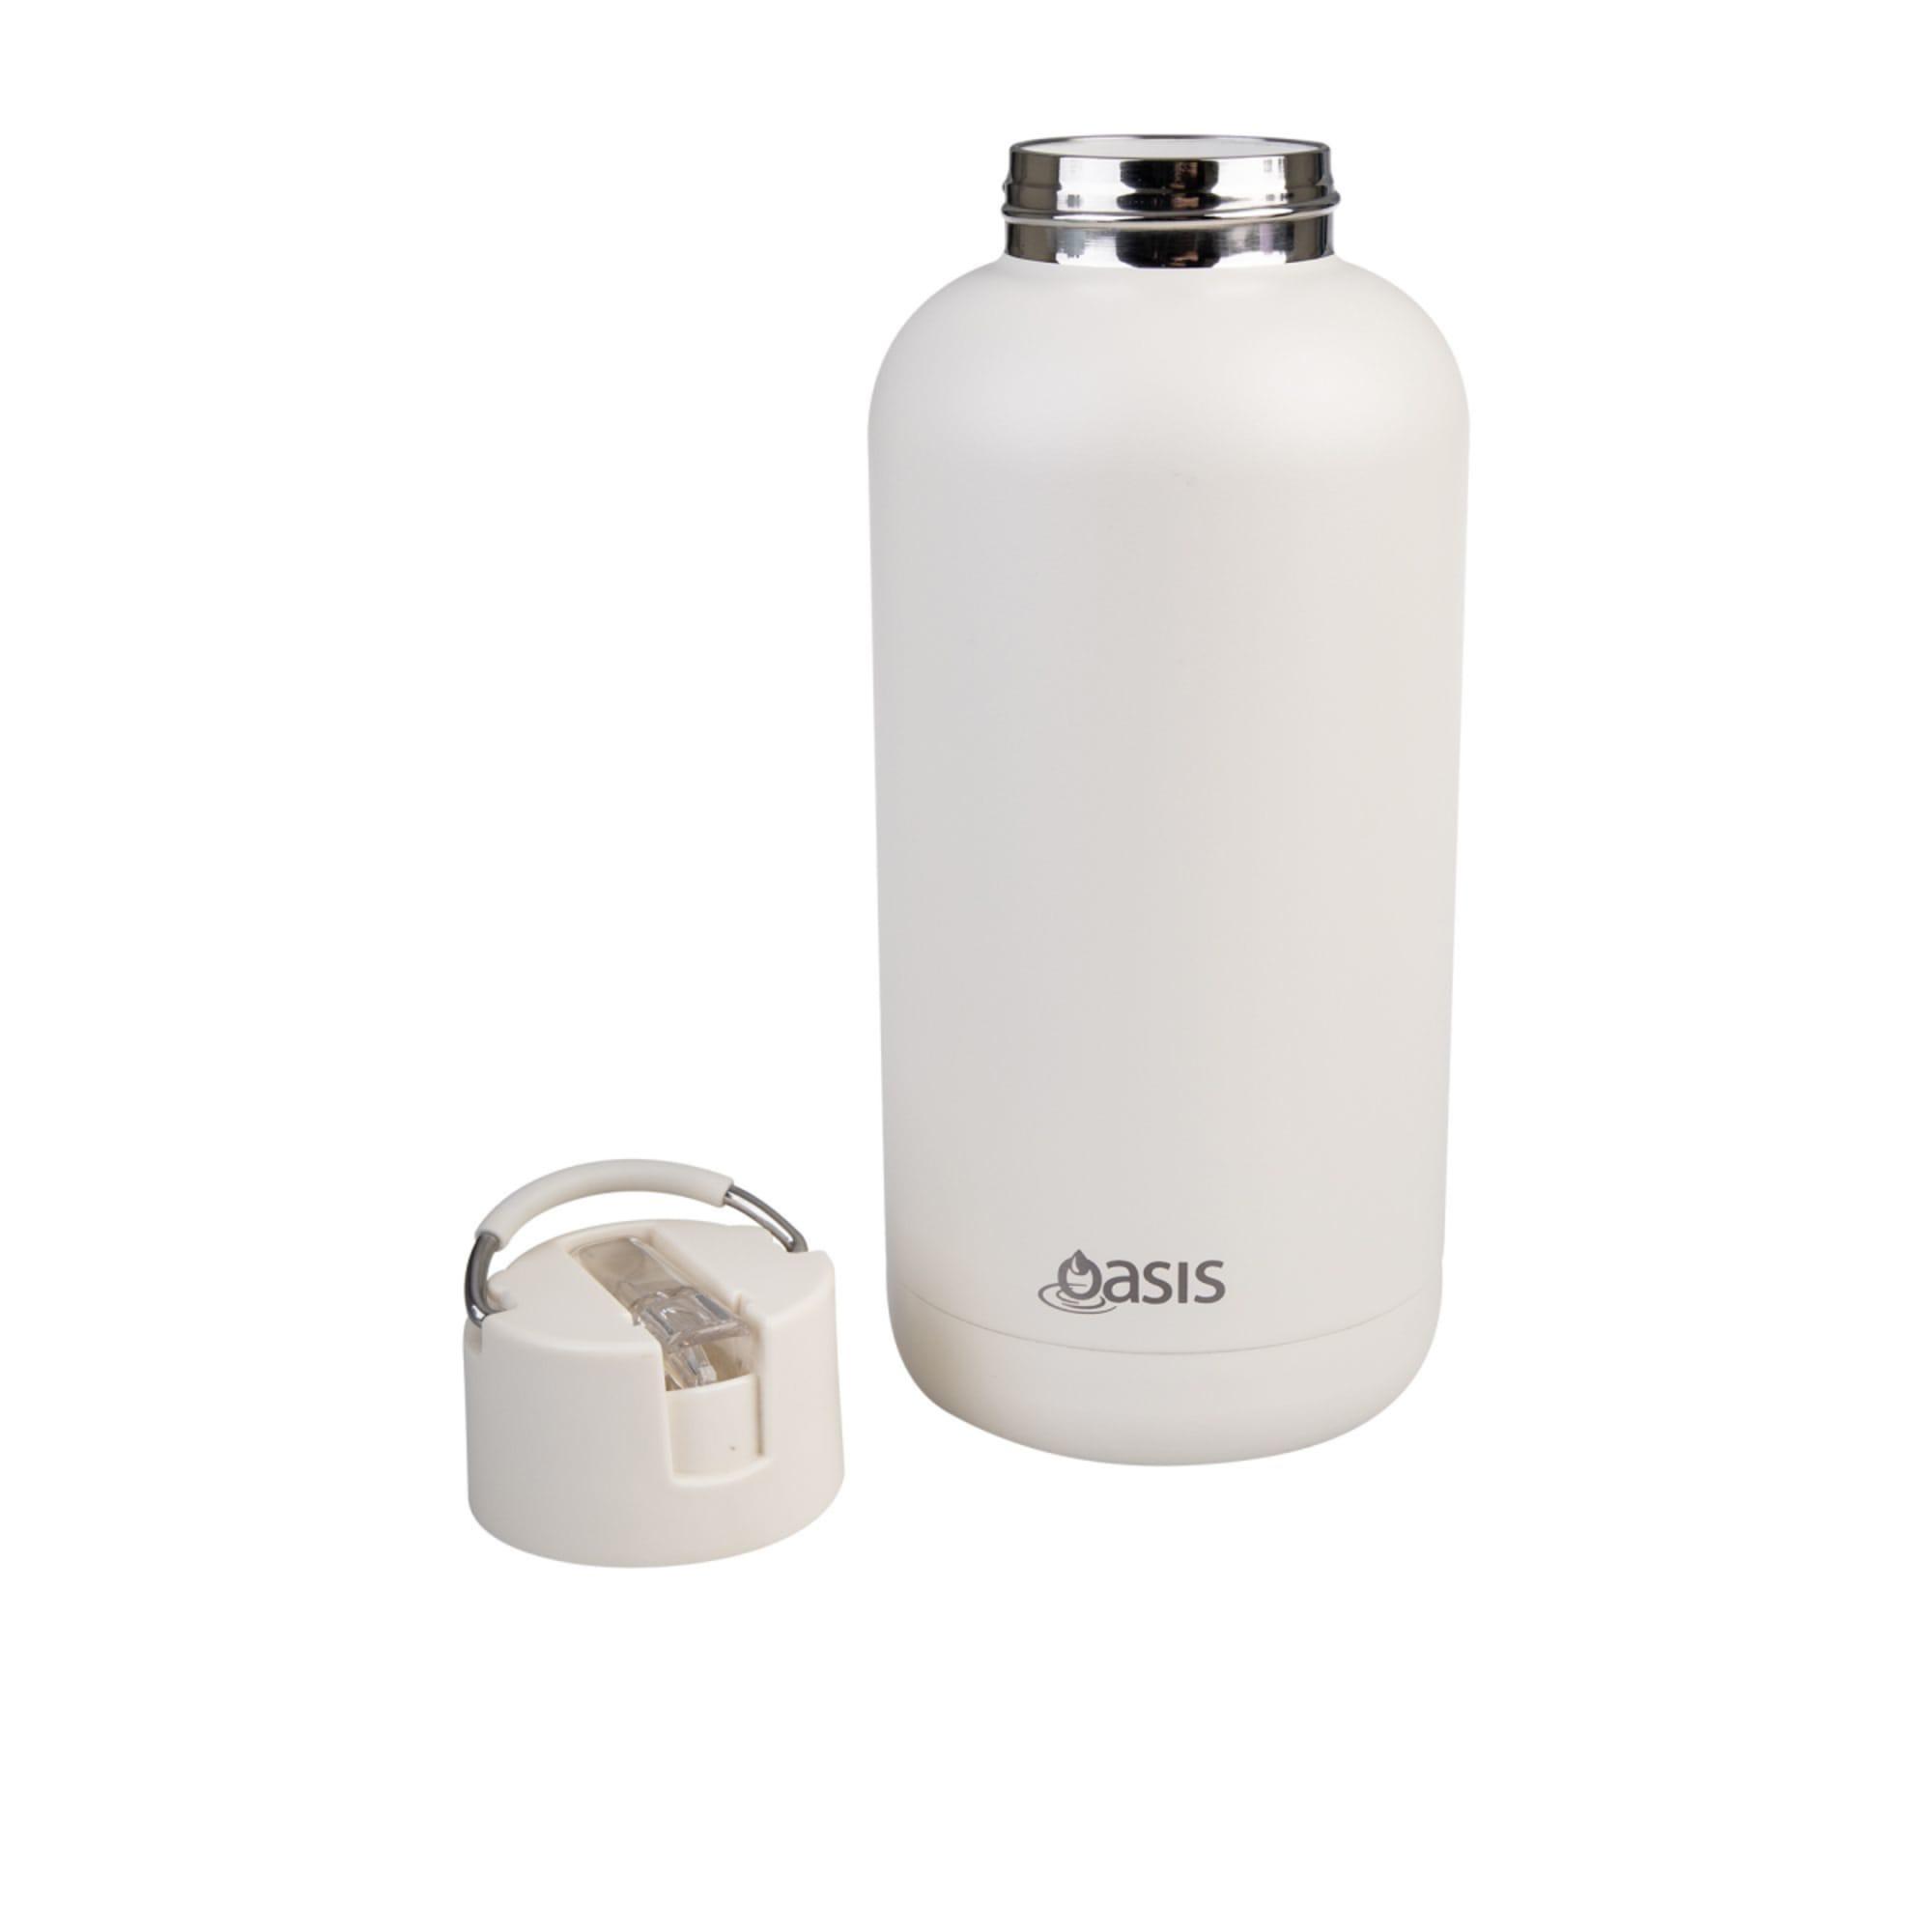 Oasis Moda Triple Wall Insulated Drink Bottle 1.5L Alabaster Image 3